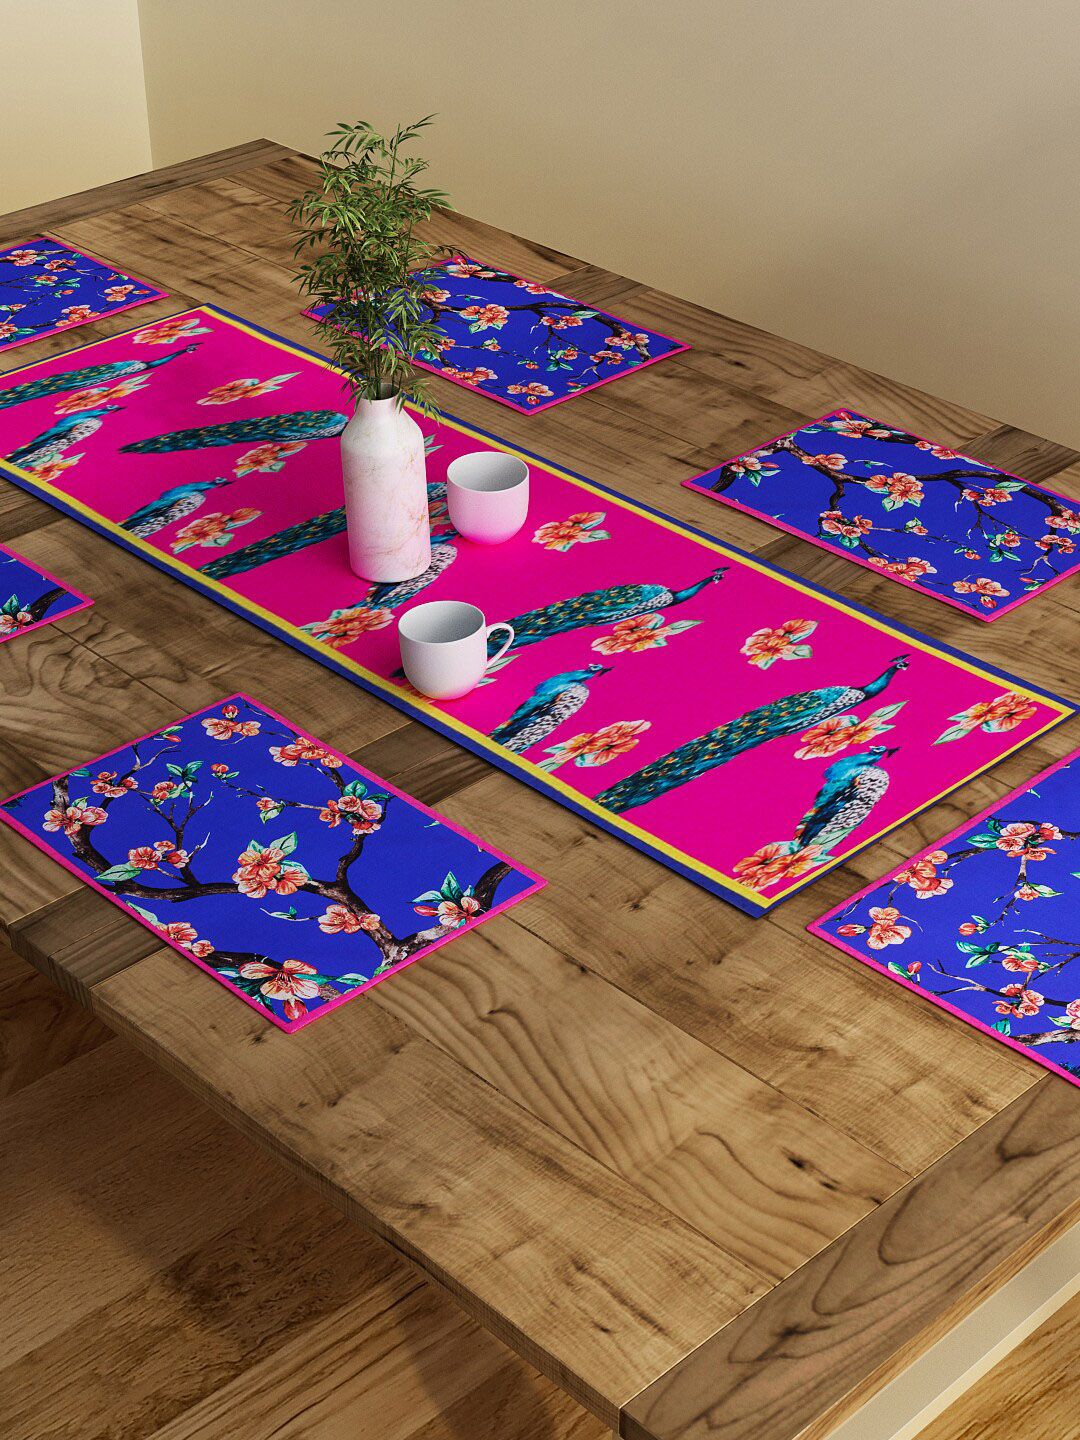 SEJ by Nisha Gupta Set of 7 Printed Table Runner & Placemats Price in India